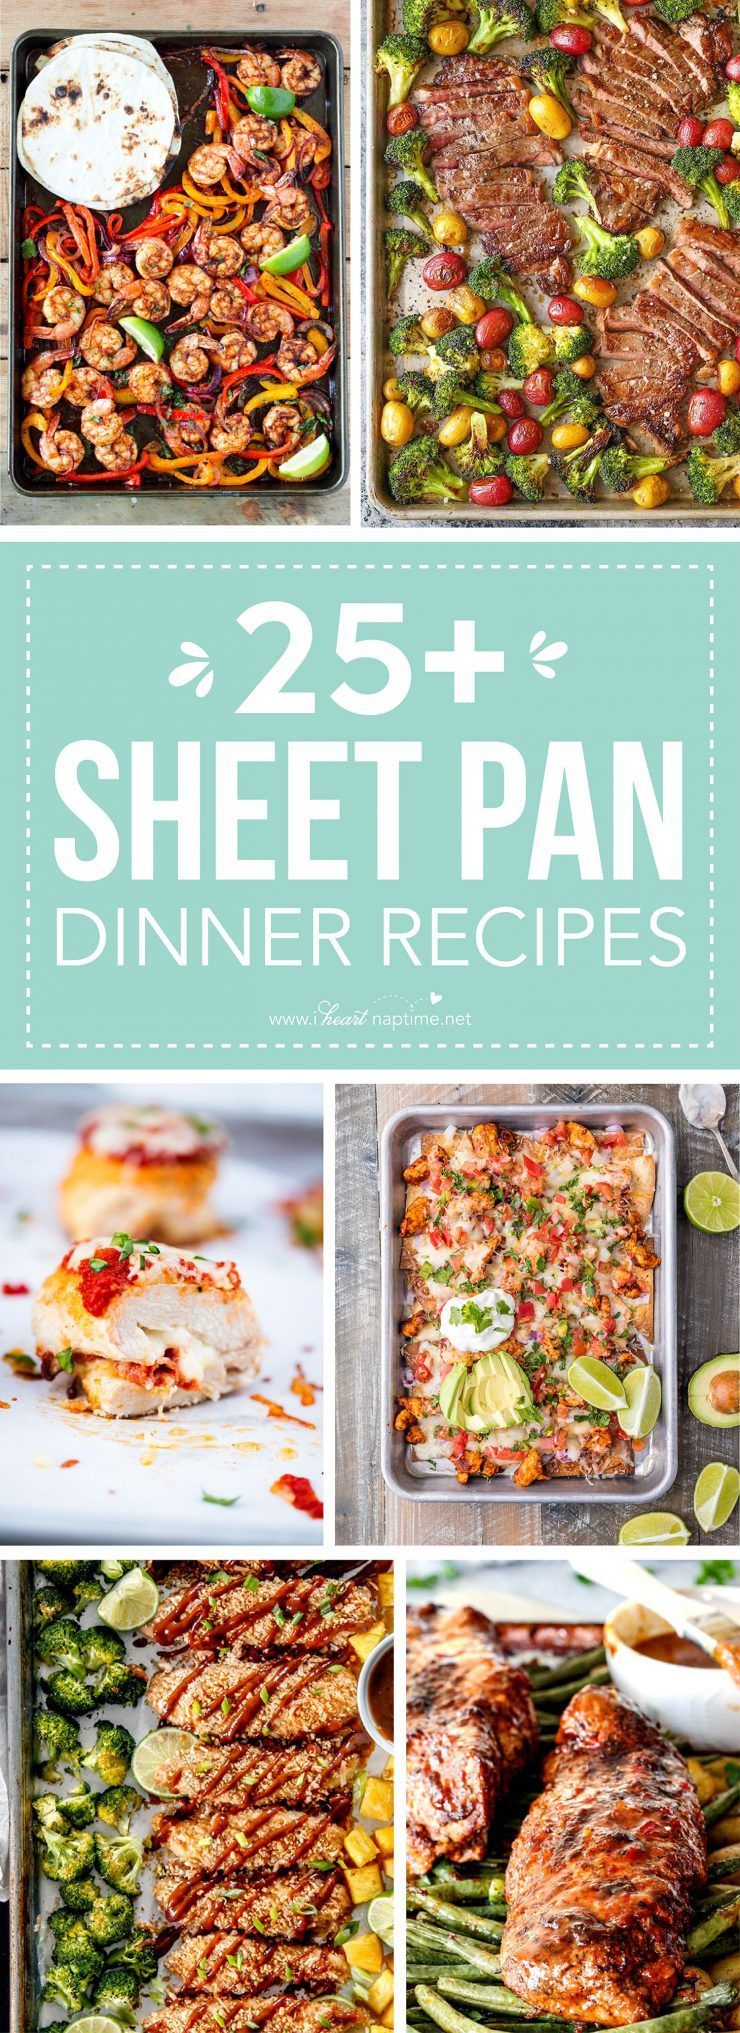 25 Delicious Sheet Pan Dinner Recipes that will make dinnertime a dream with easy prep work and less dishes!